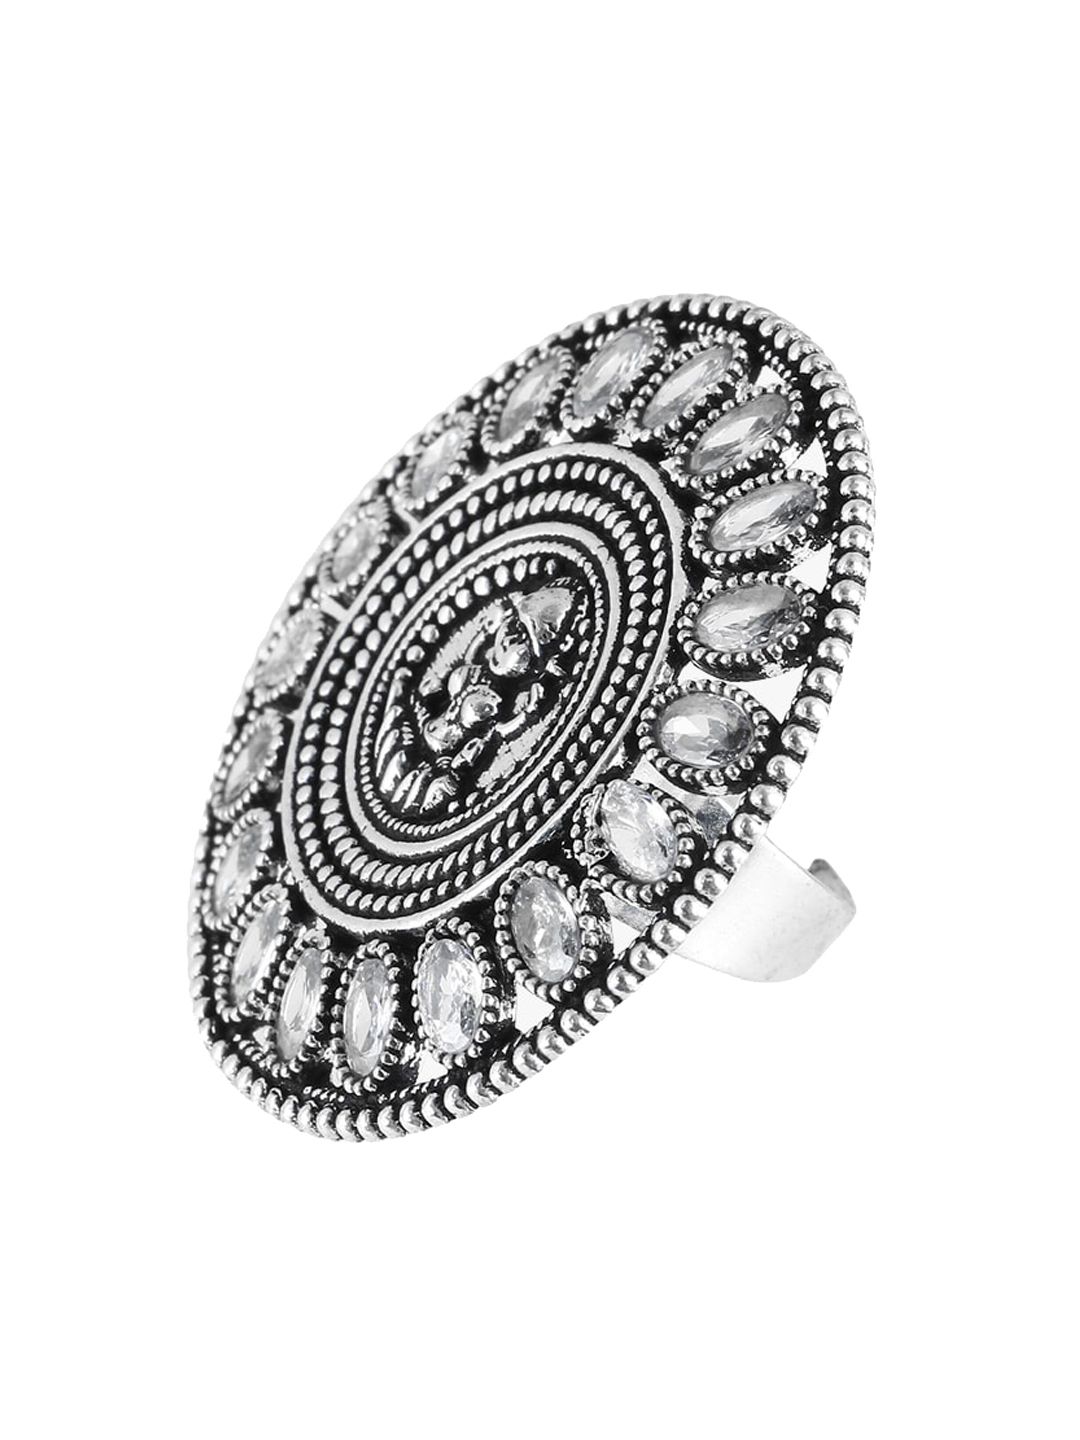 Adwitiya Collection Oxidized Silver-Plated & White Stone Studded Adjustable Finger Ring Price in India